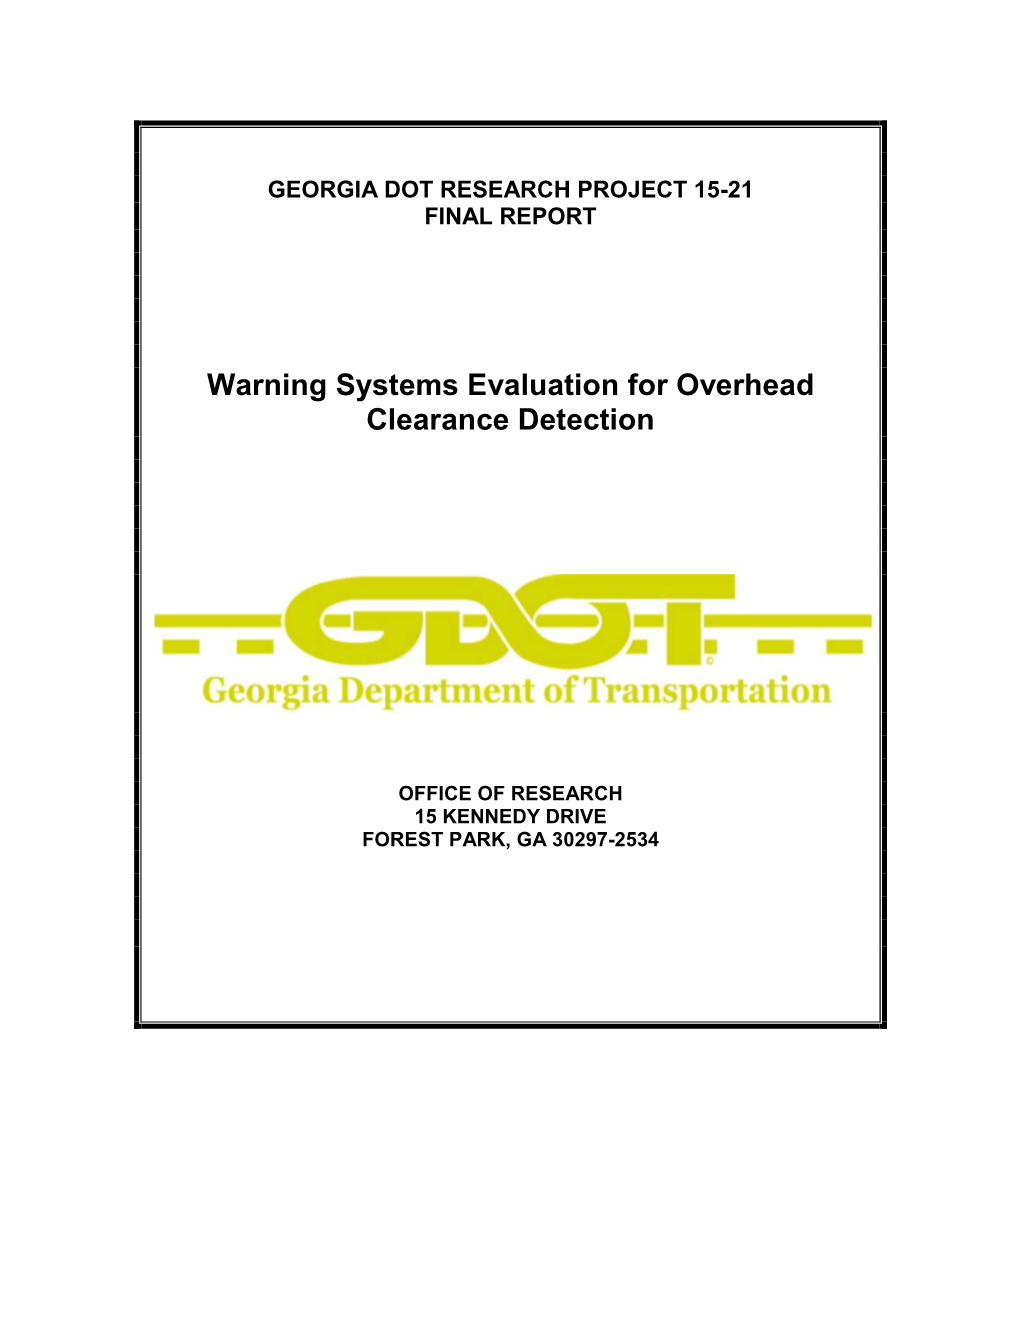 Warning Systems Evaluation for Overhead Clearance Detection